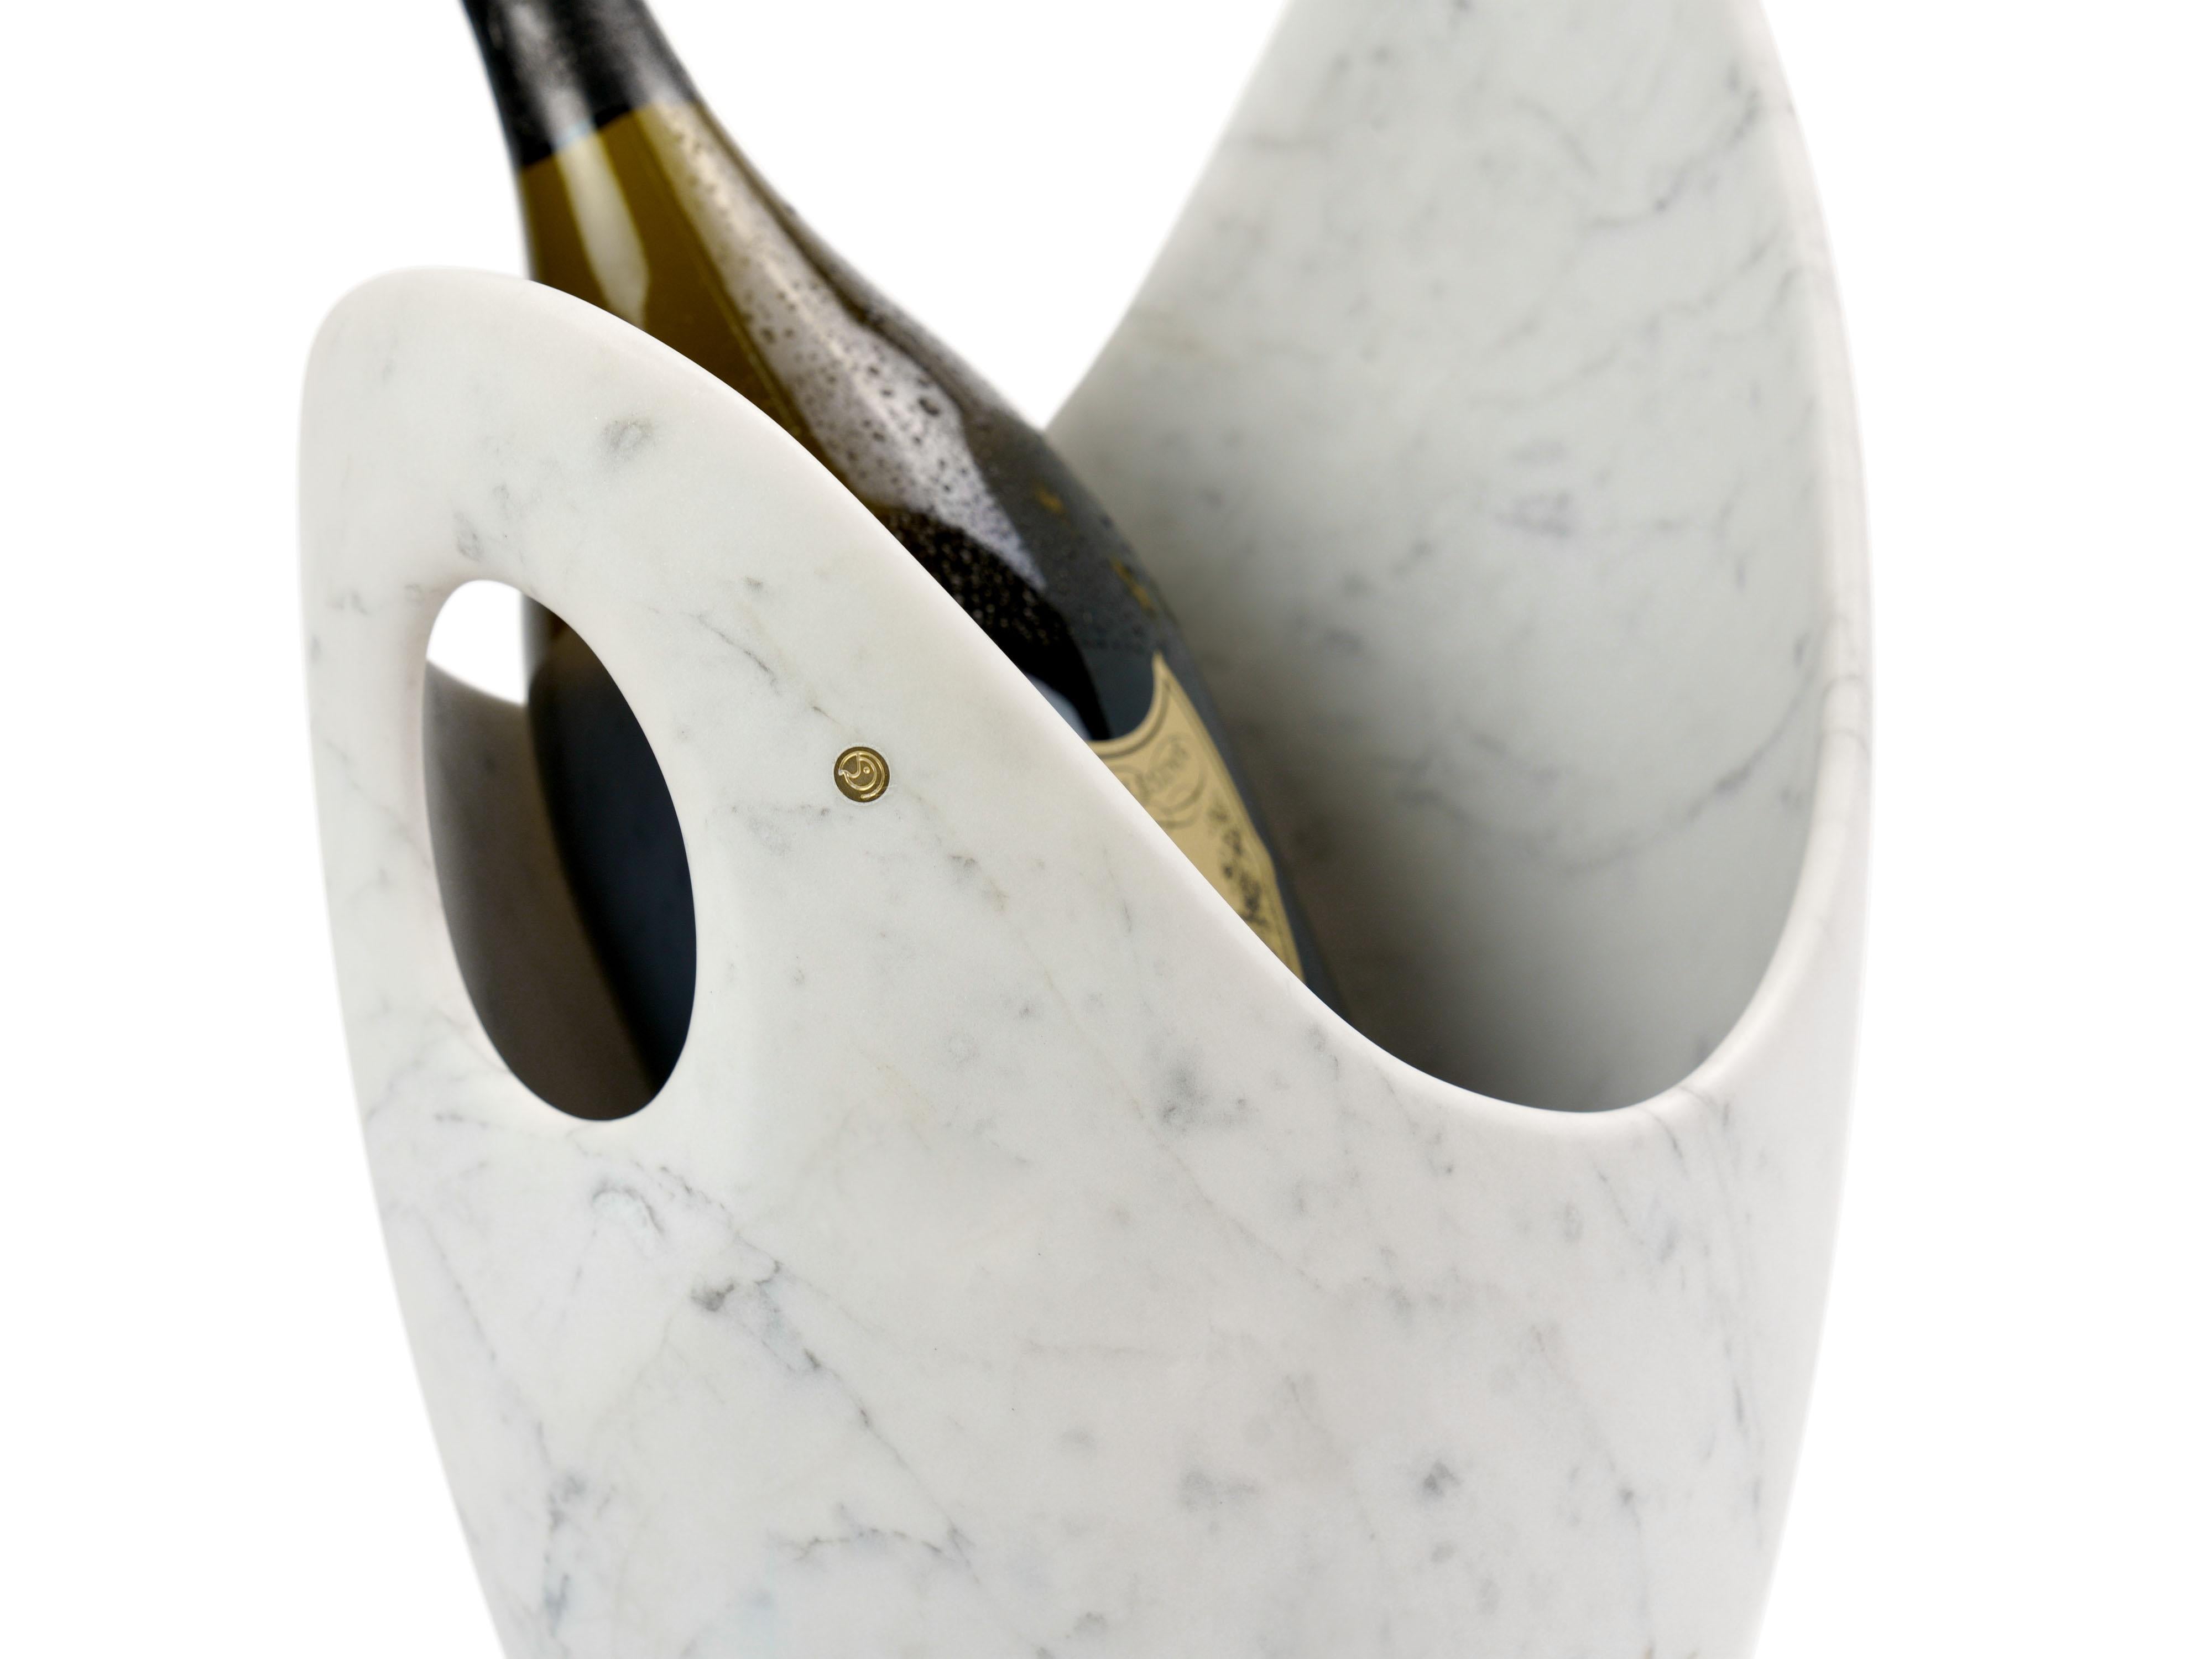 Contemporary Champagne Bucket Wine Cooler Sculpture Block White Carrara Marble Made in Italy For Sale